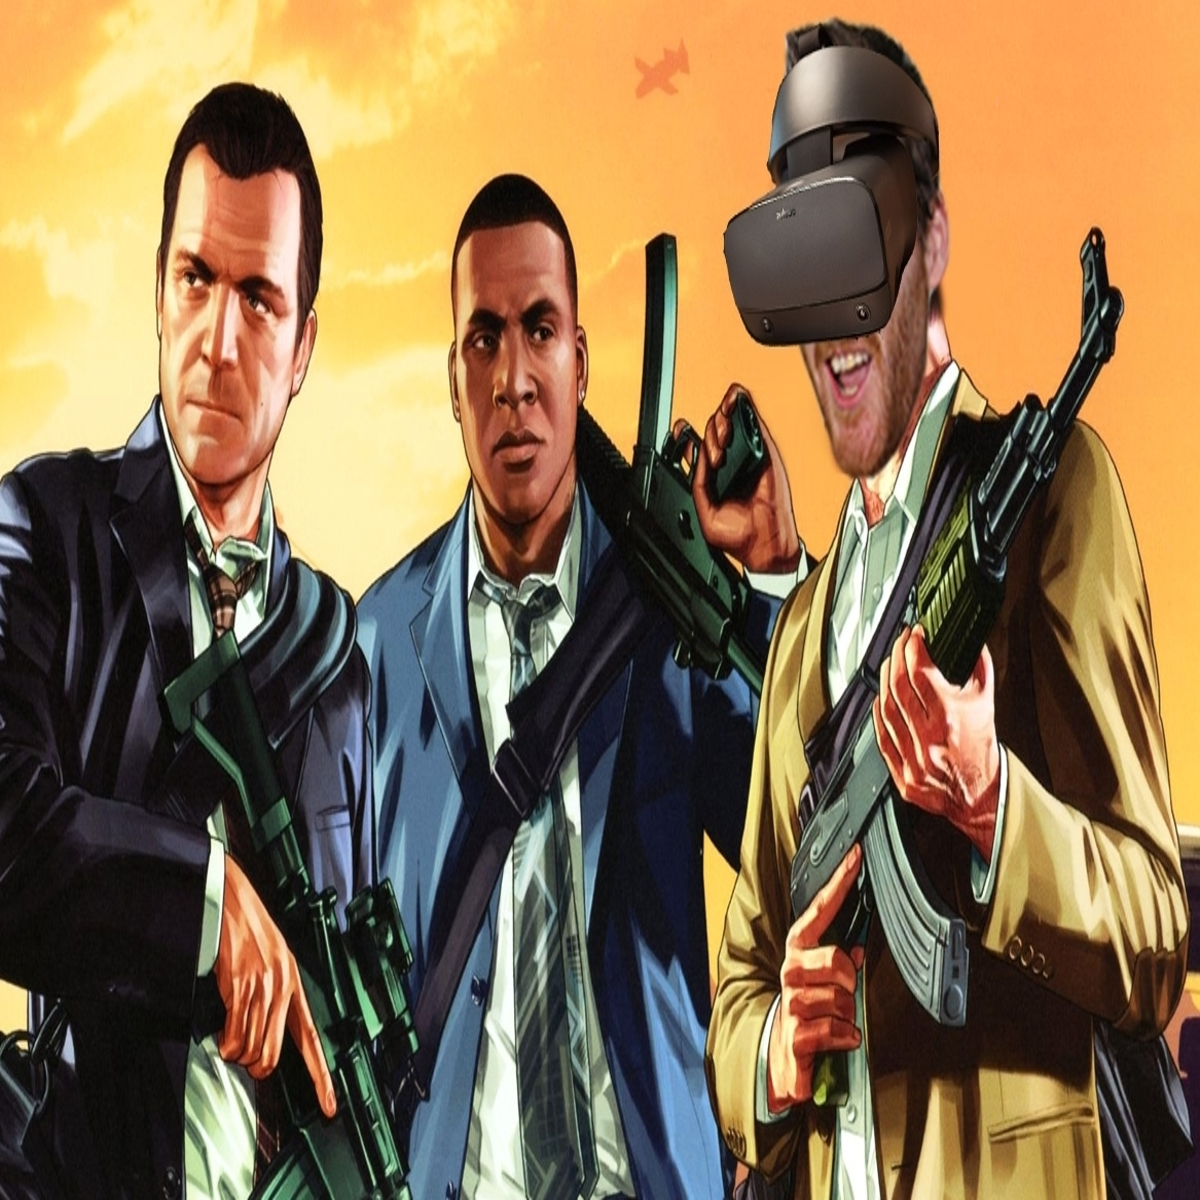 GTA V Free On PC For A Limited Time With VR Mod Support - VRScout